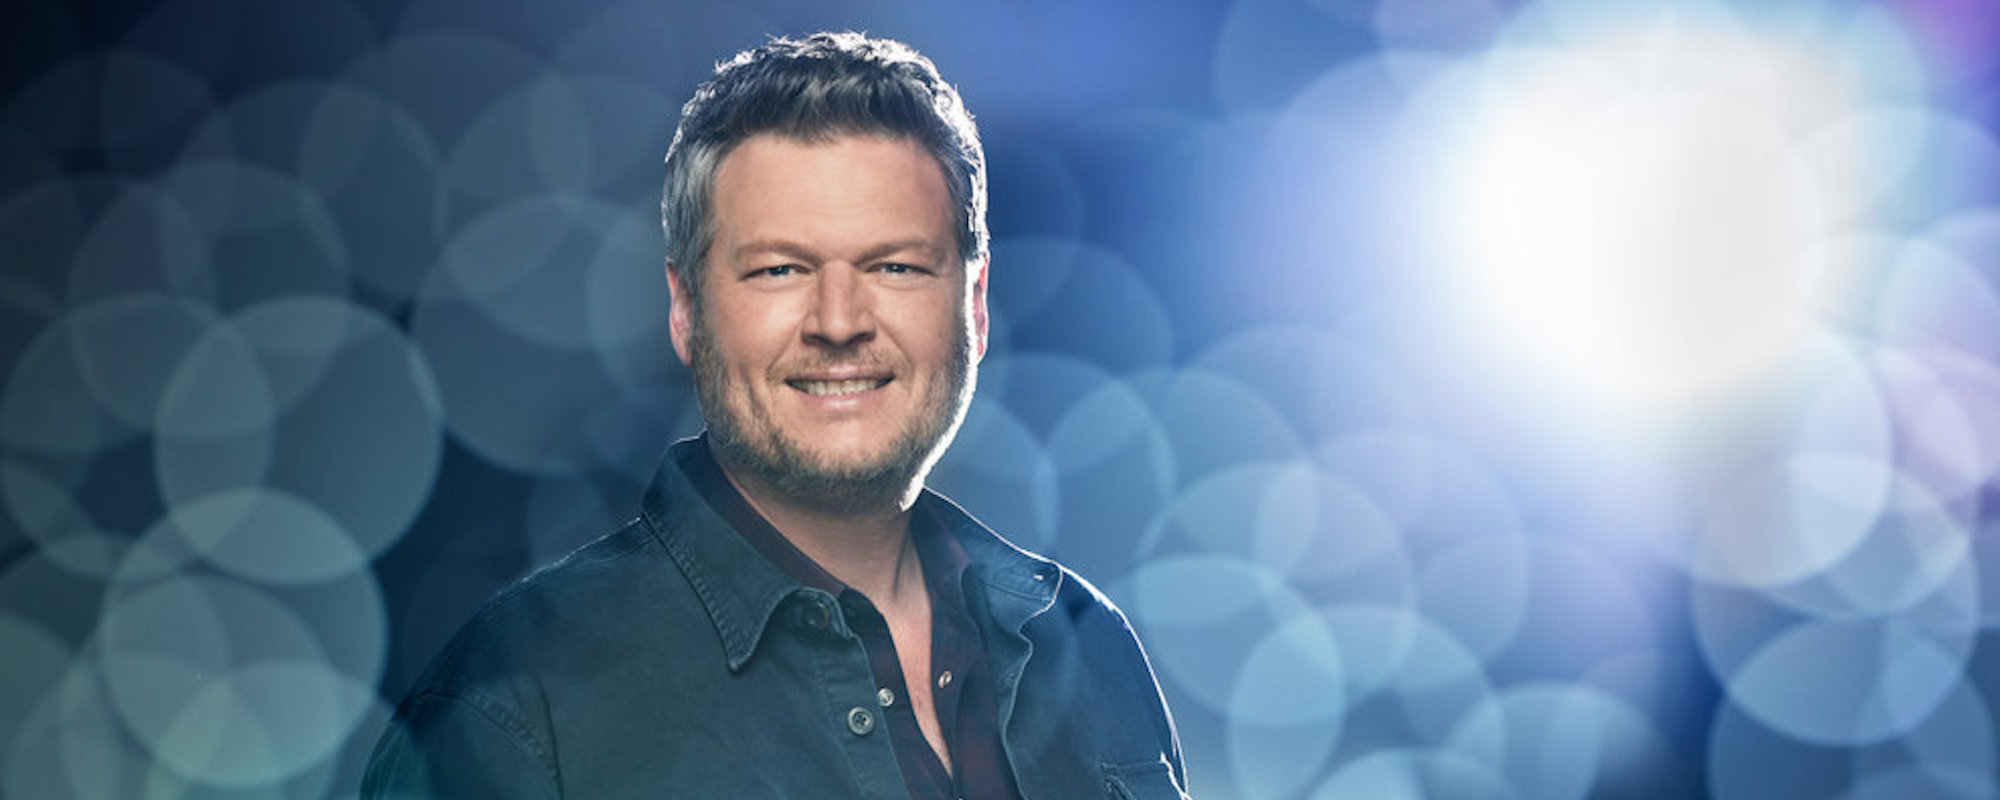 Blake Shelton Wants Neal McCoy to Replace Him on ‘The Voice’